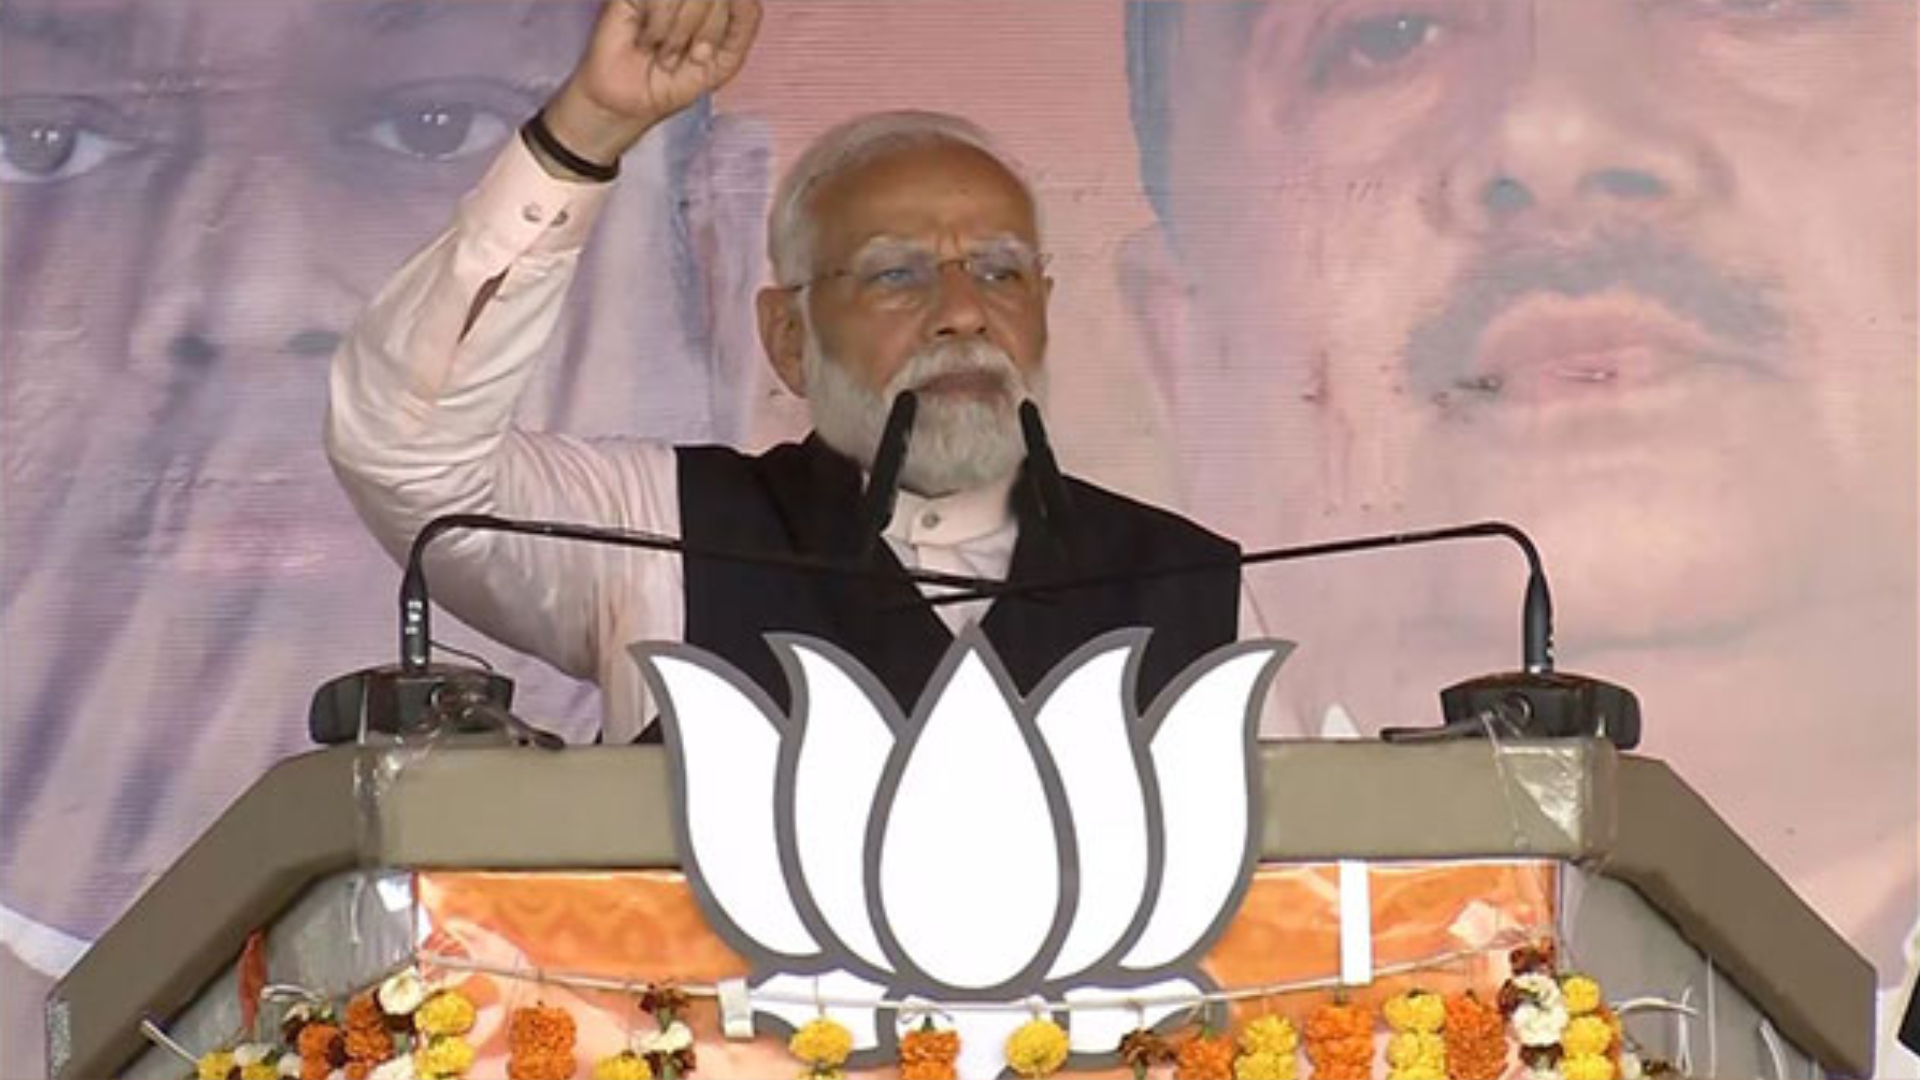 Country is seeing what TMC has done with sisters of Sandeshkhali: PM Modi